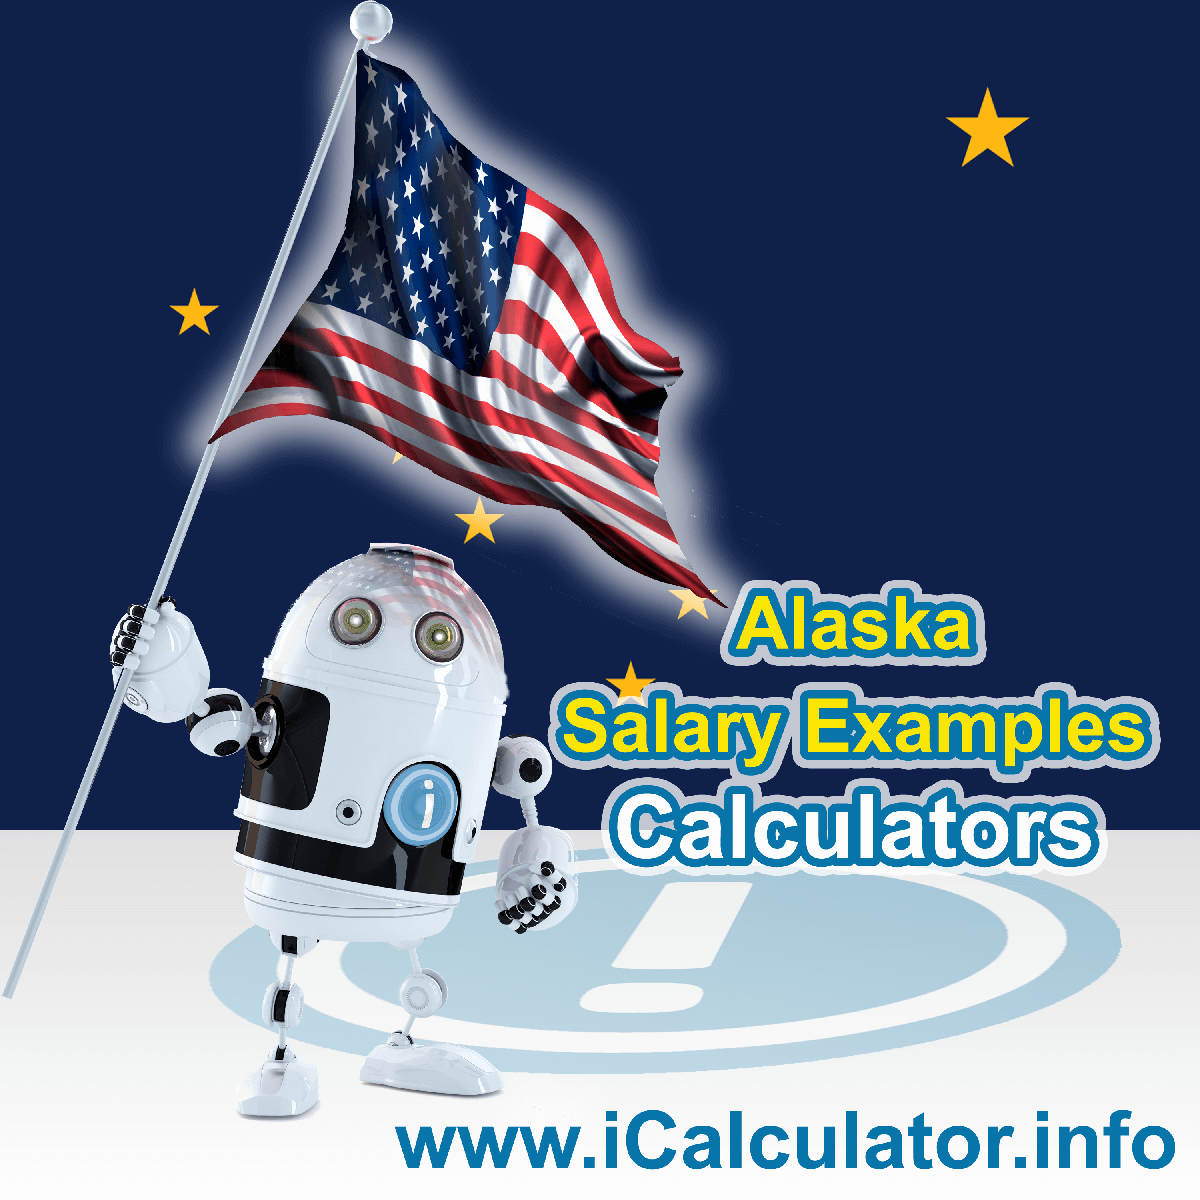 Alaska Salary Example for $ 65,000.00 in 2023 | iCalculator™ | $ 65,000.00 salary example for employee and employer paying Alaska State tincome taxes. Detailed salary after tax calculation including Alaska State Tax, Federal State Tax, Medicare Deductions, Social Security, Capital Gains and other income tax and salary deductions complete with supporting Alaska state tax tables 